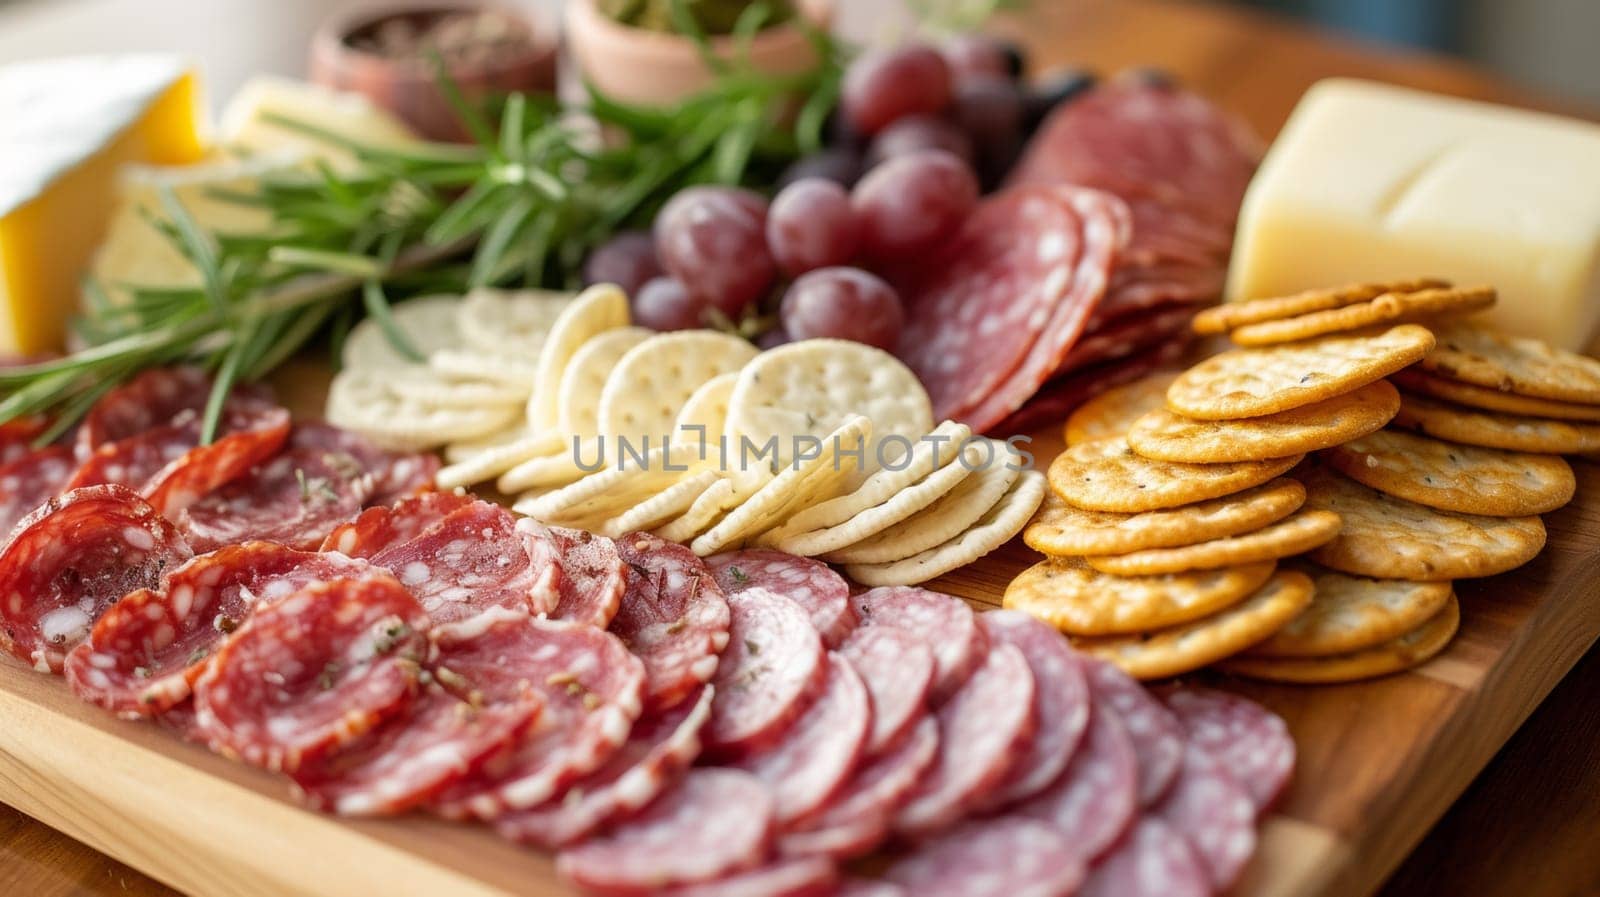 A wooden cutting board with crackers, cheese and meat on it